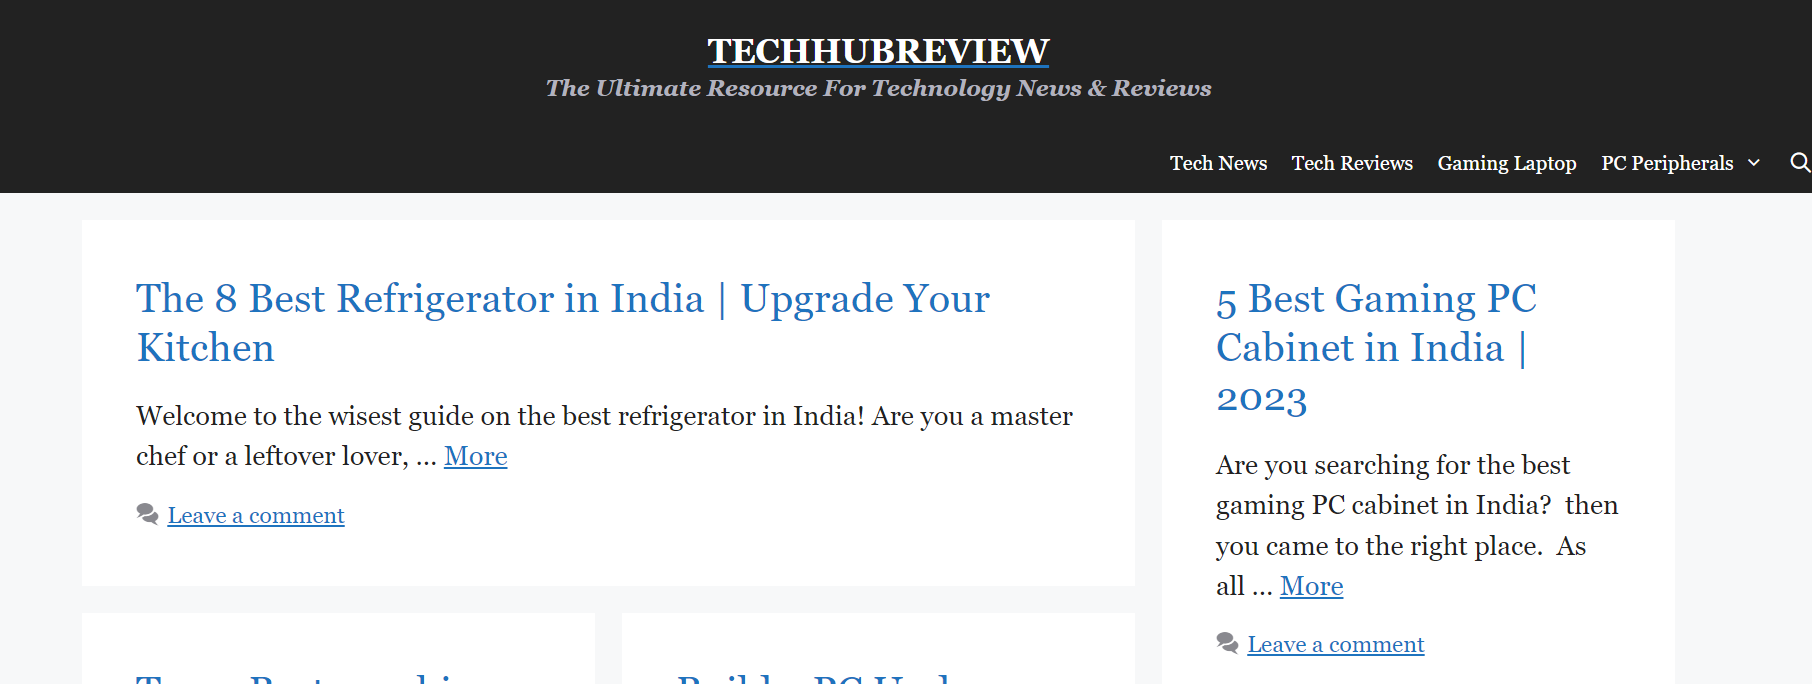 Techhubreview